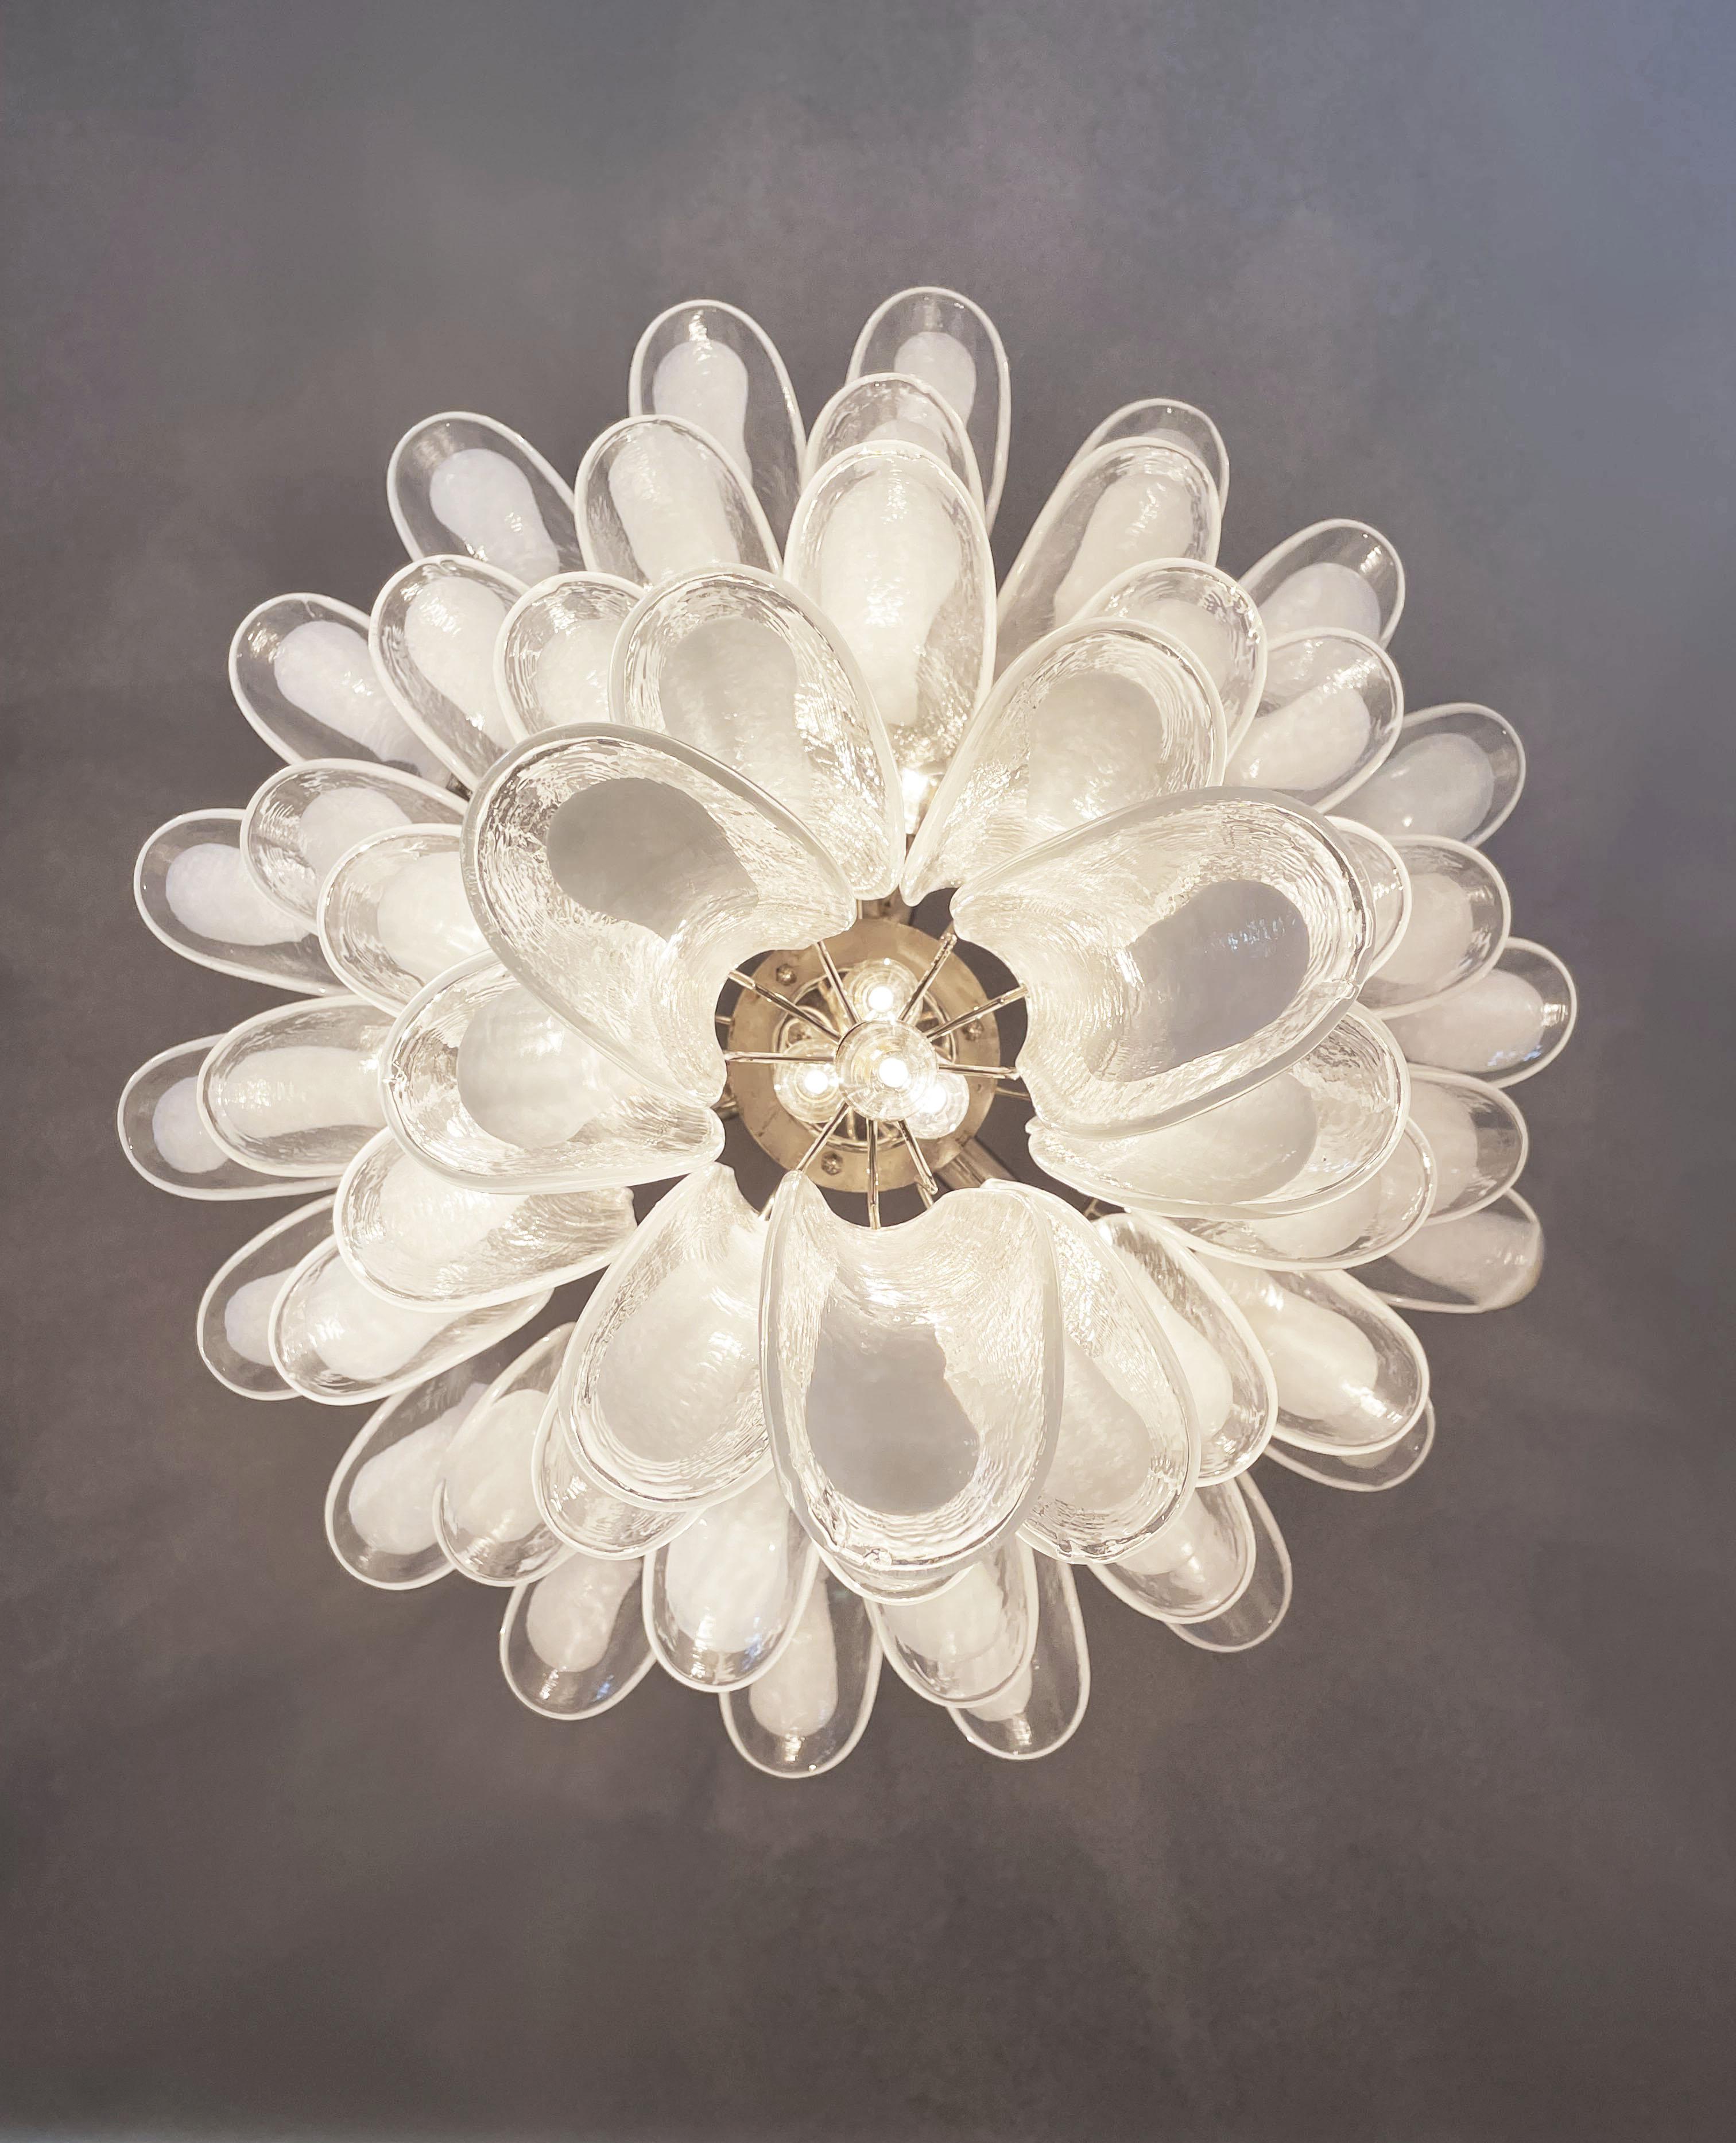 Italian vintage Murano chandelier in the manner of Mazzega - 52 glass petals For Sale 5